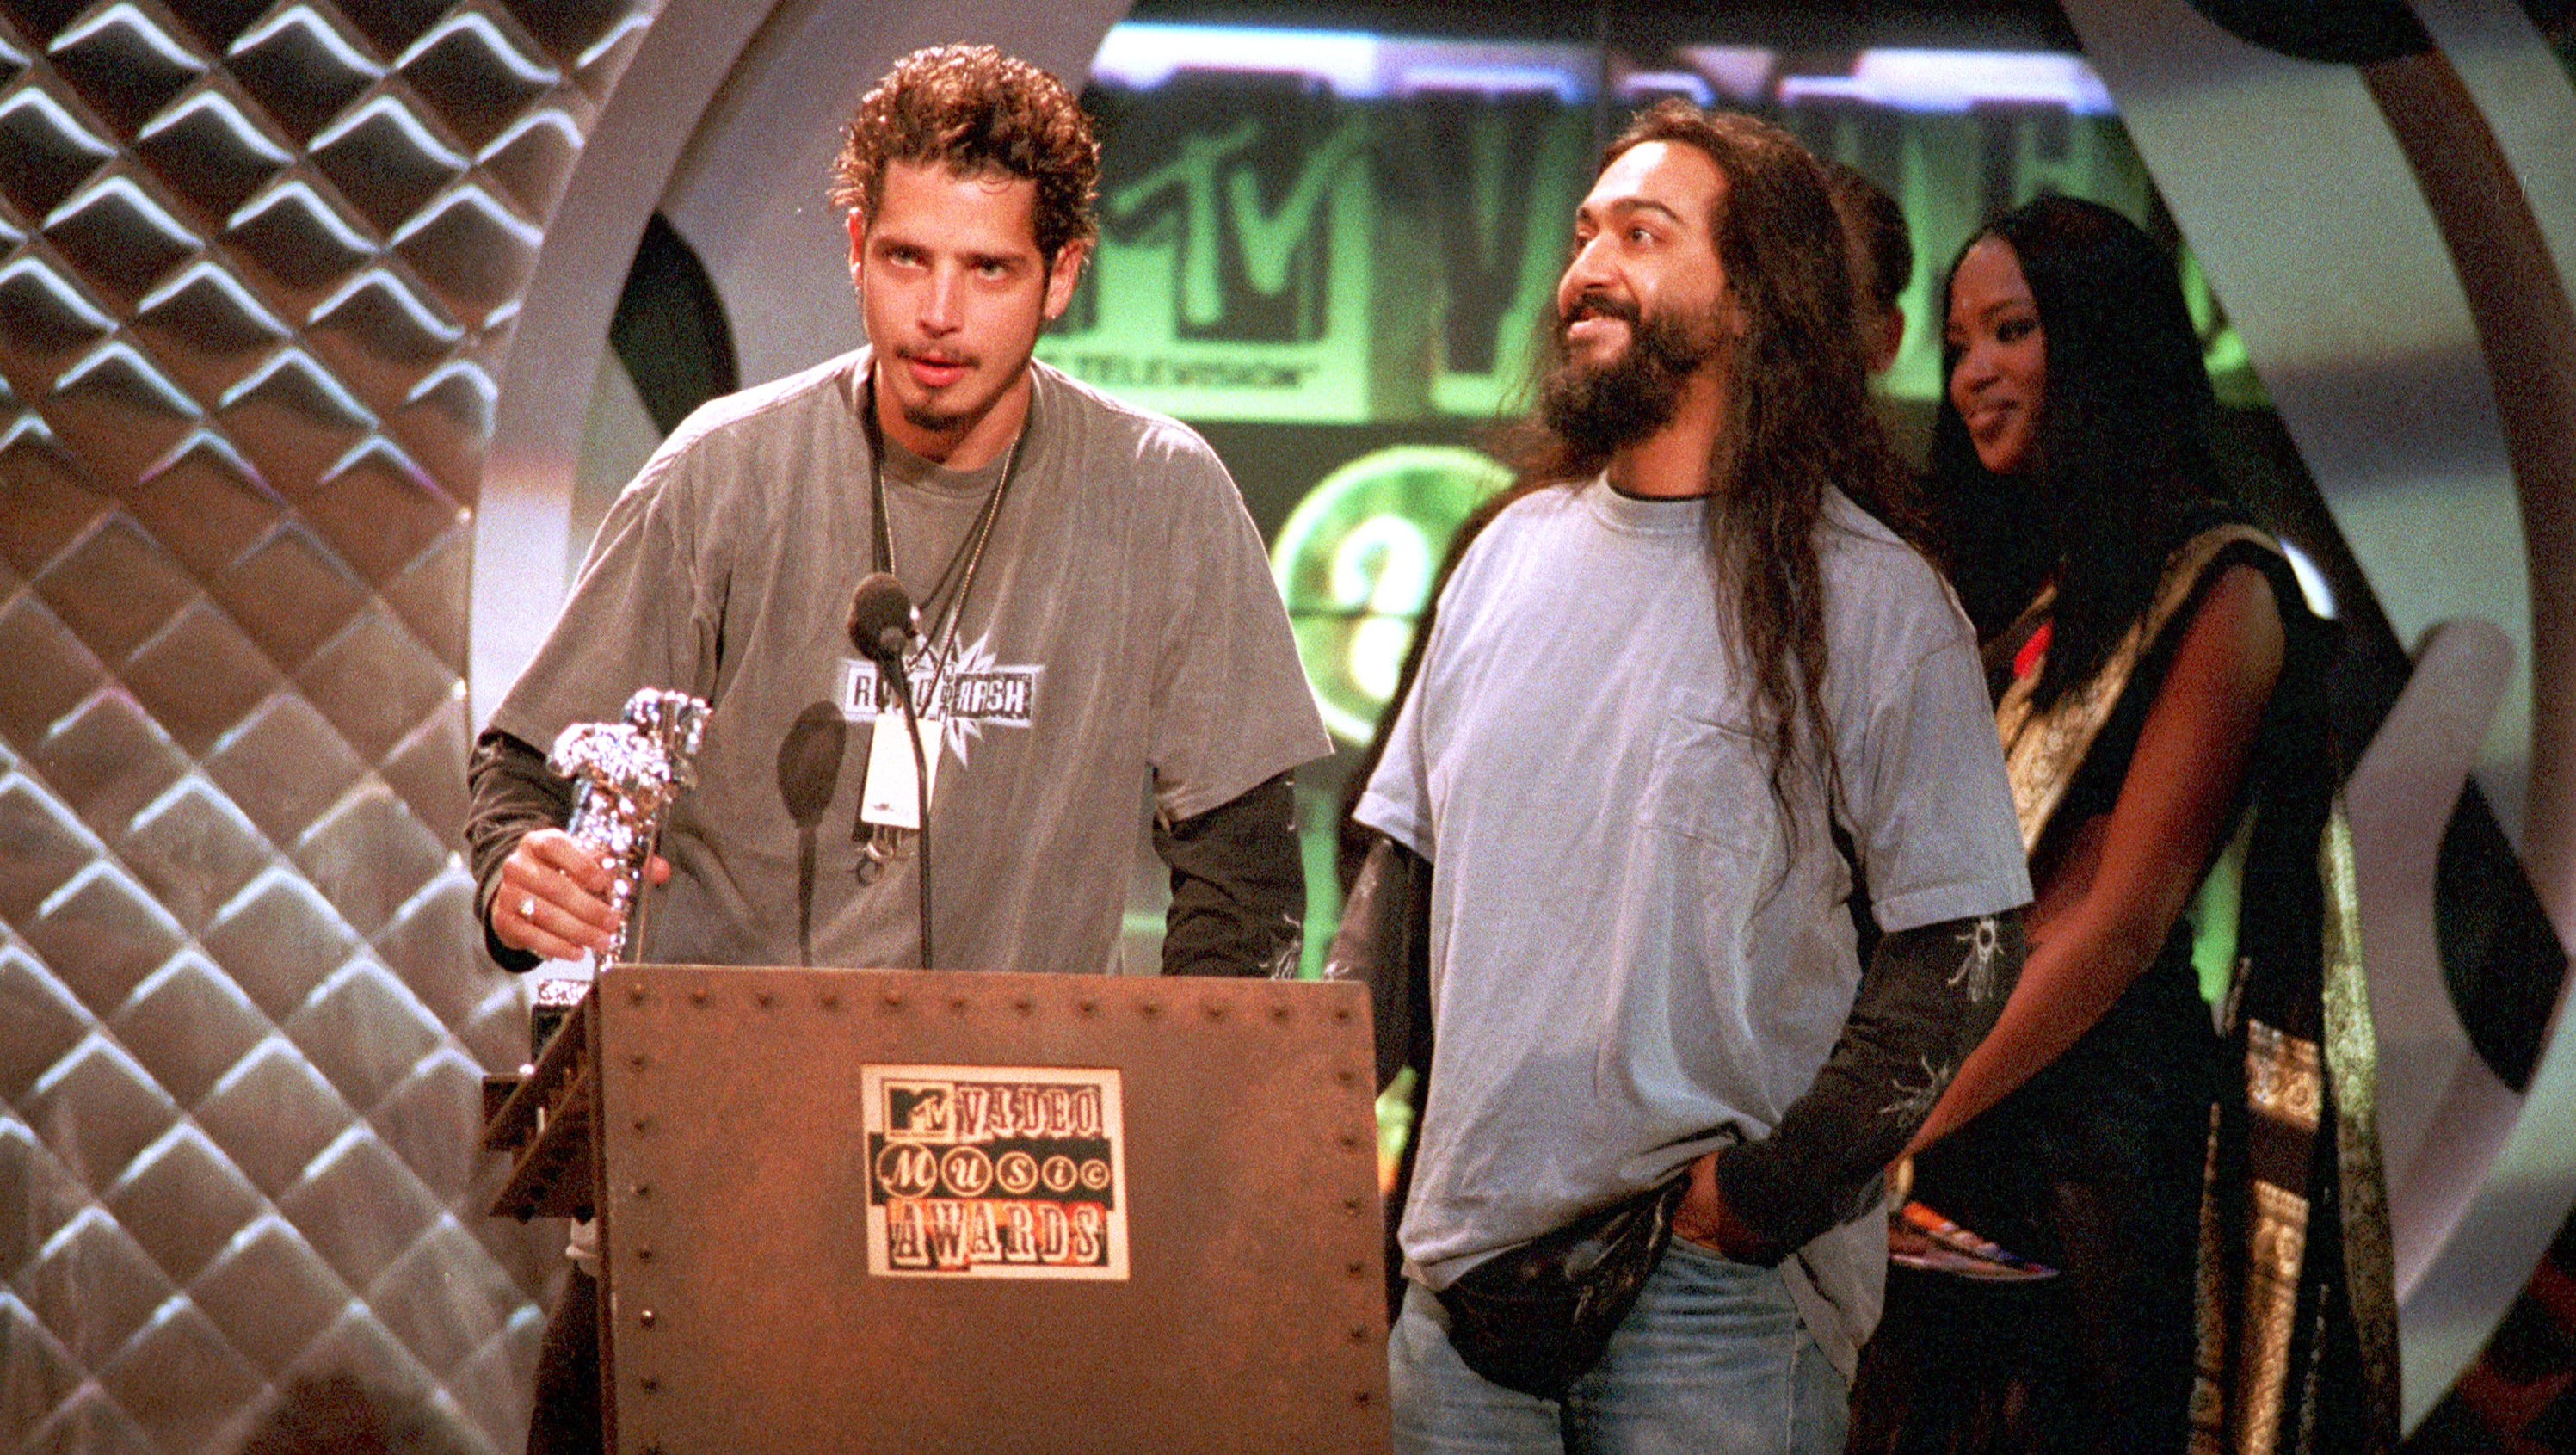 Chris Cornell, left, and Kim Thayil of Soundgarden accept their award at the MTV Video Music Awards at New York's Radio City Music Hall, Sept. 8, 1994.  The band won Best Metal/Hard Rock Video for "Black Hole Sun."